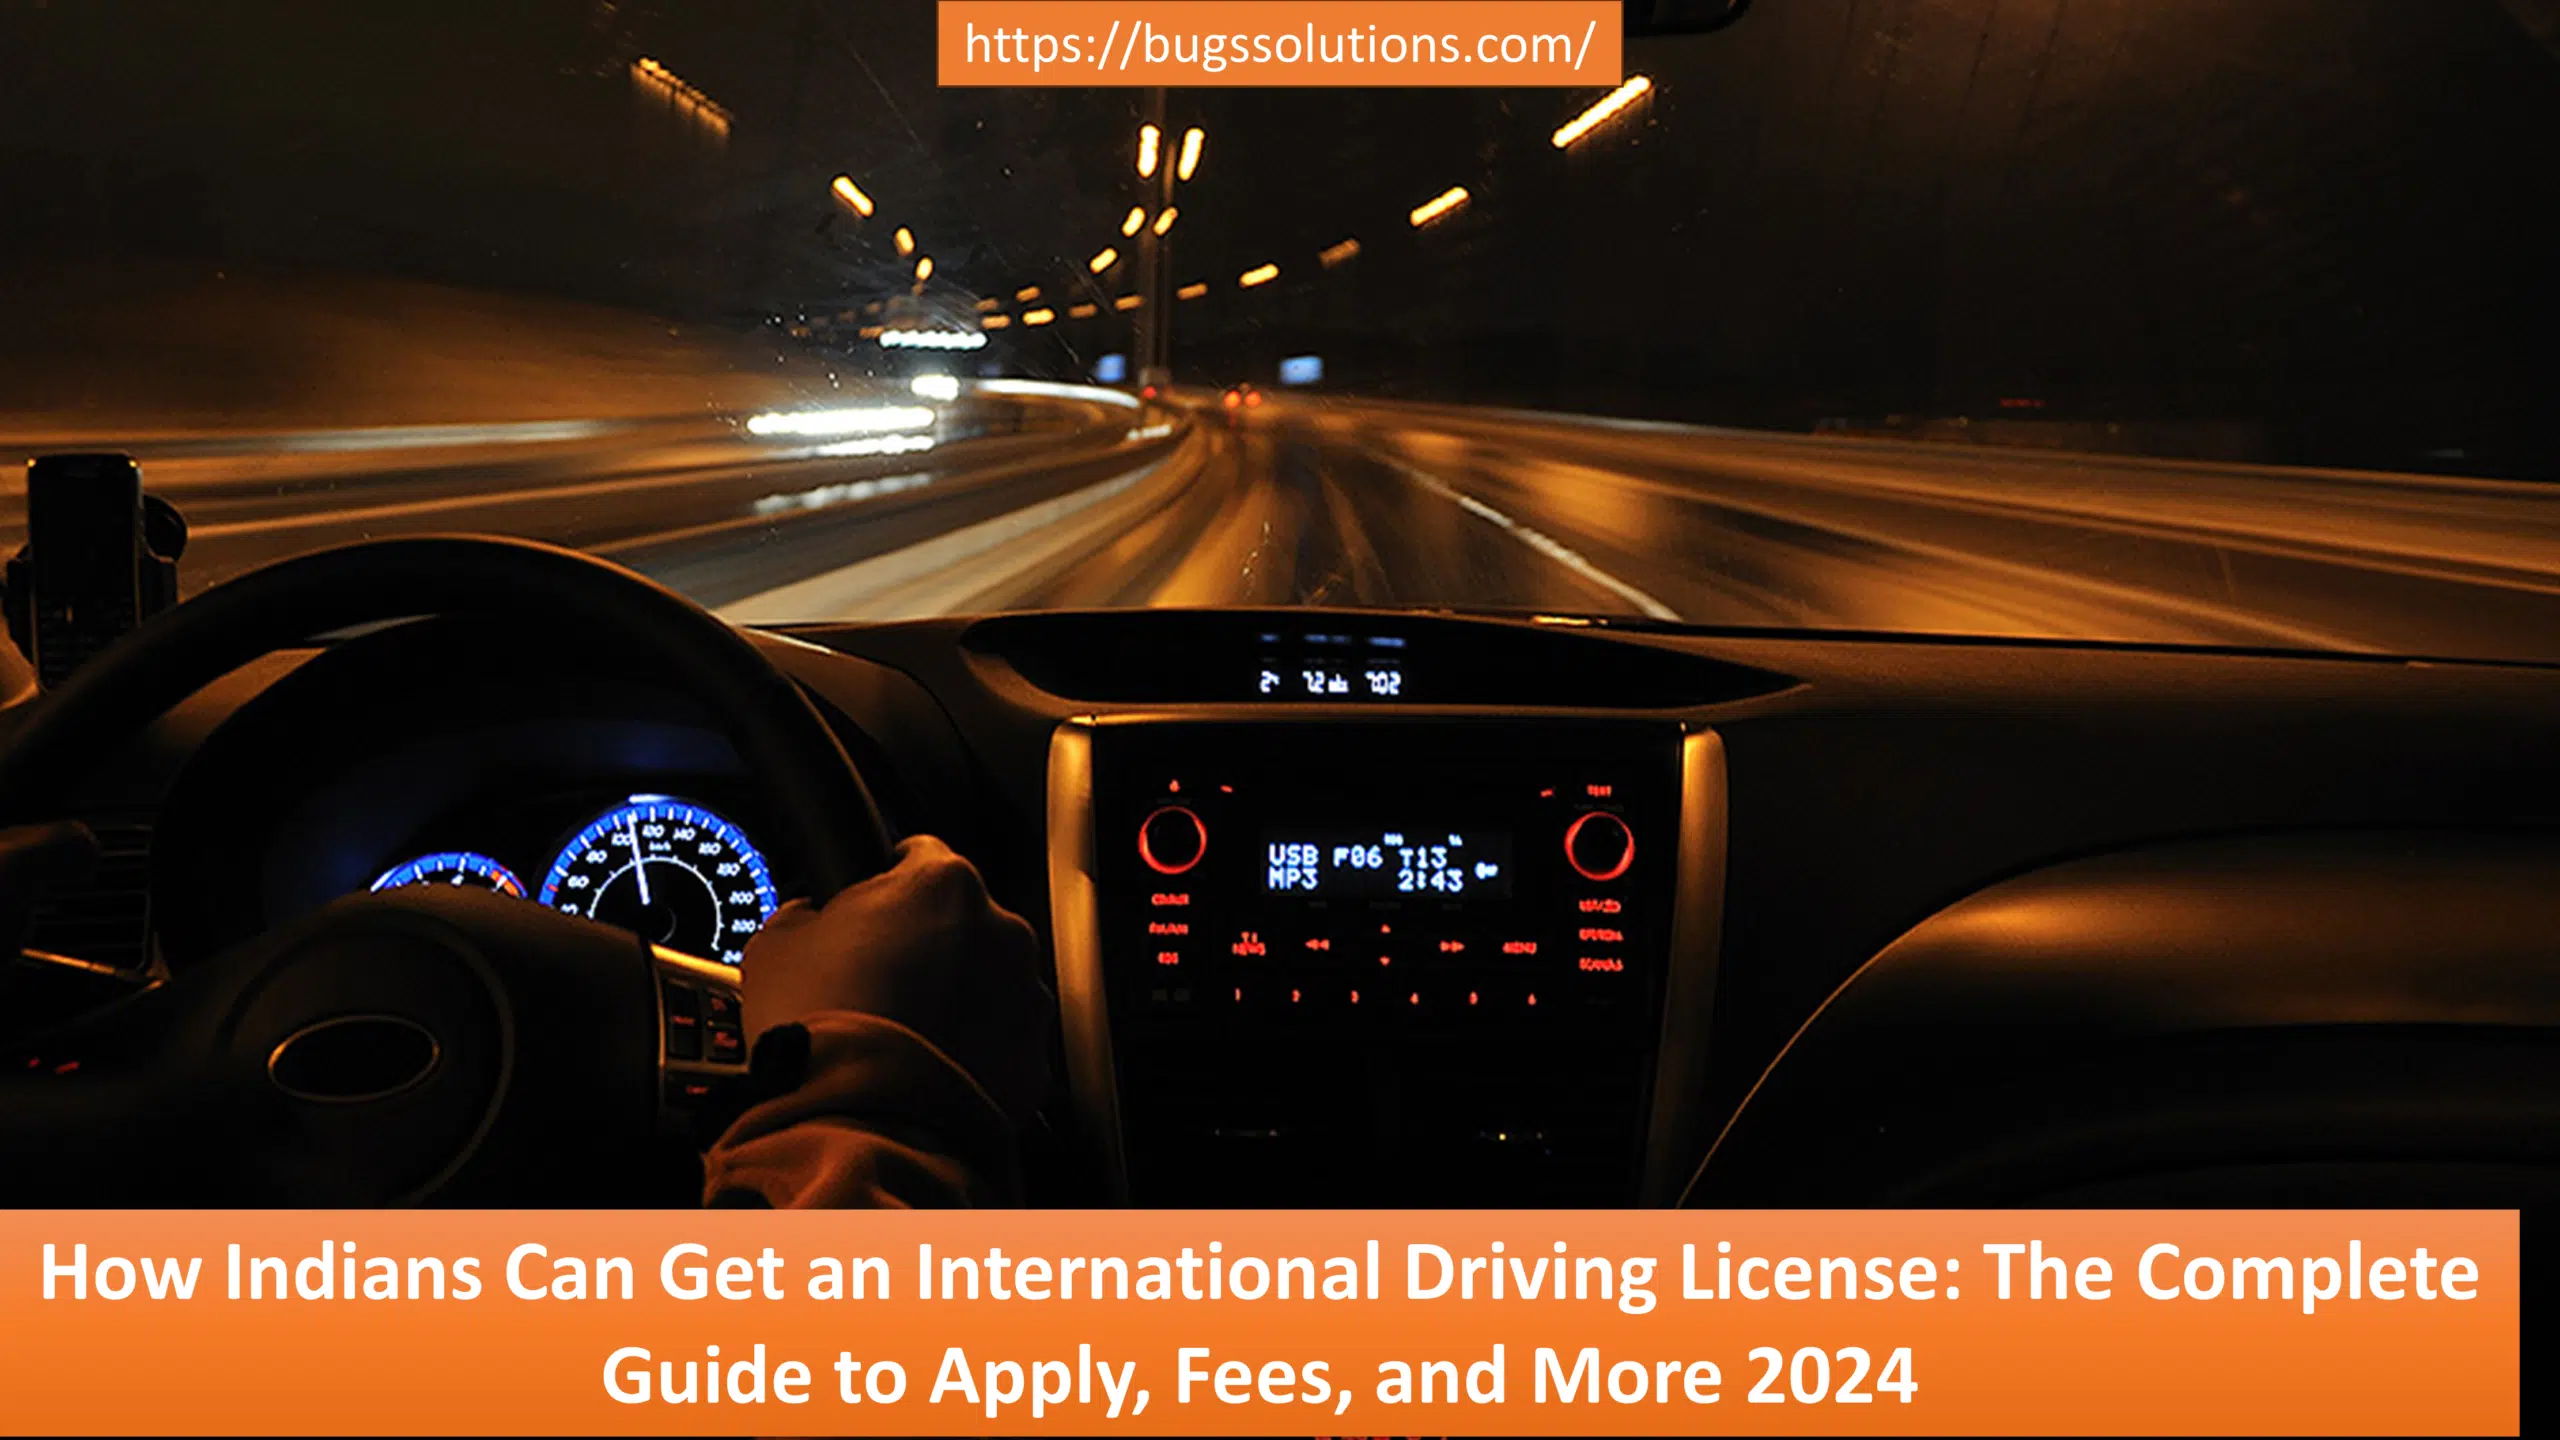 How Indians Can Get an International Driving License: The Complete Guide to Apply, Fees, and More 2024